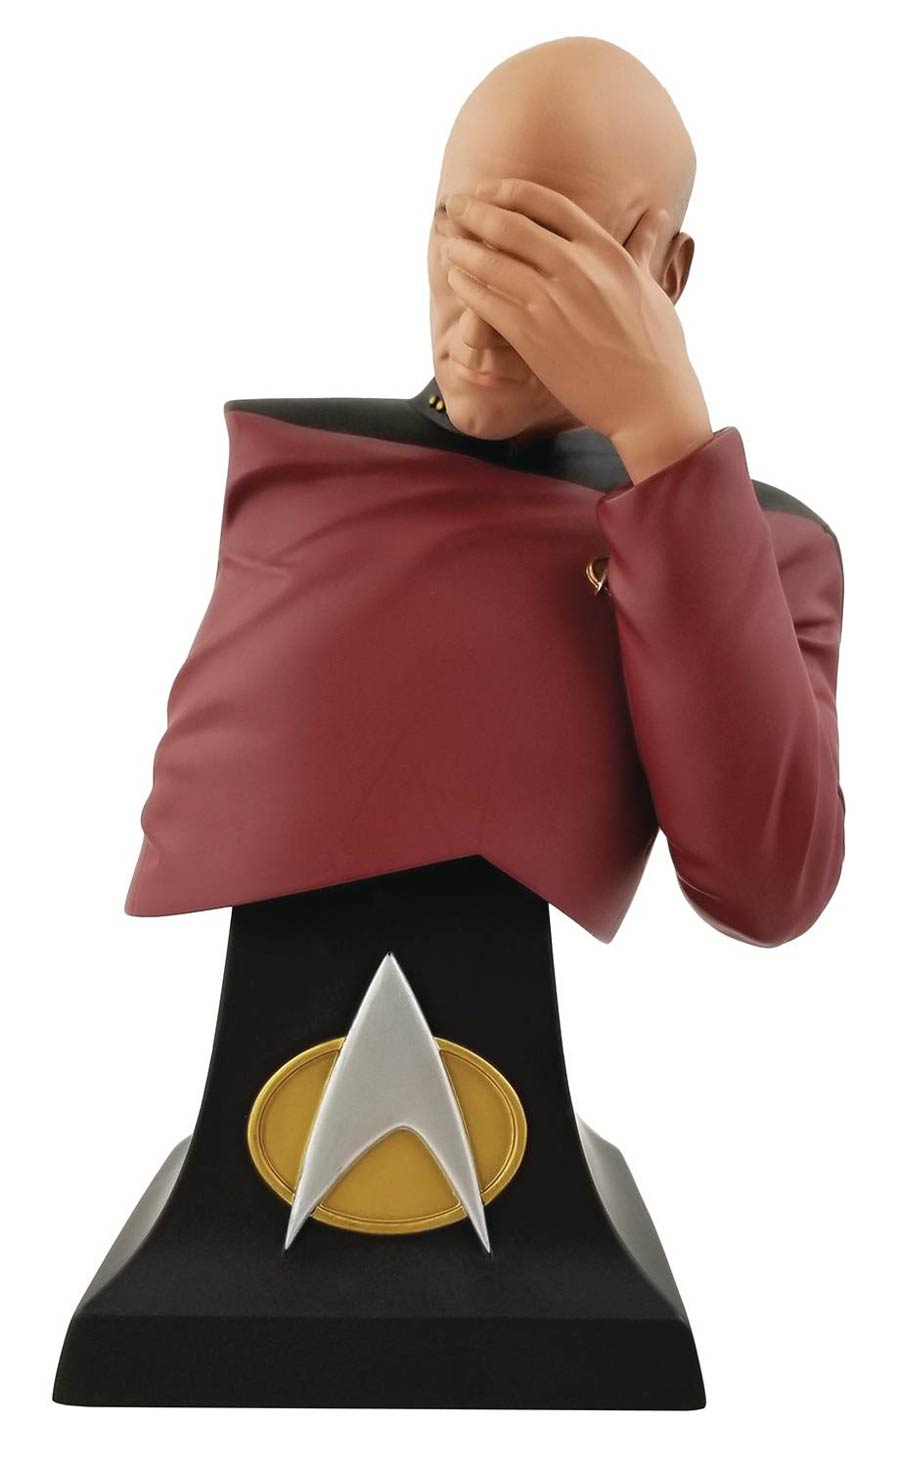 Star Trek The Next Generation Picard Facepalm SDCC 2020 Limited Edition Bust